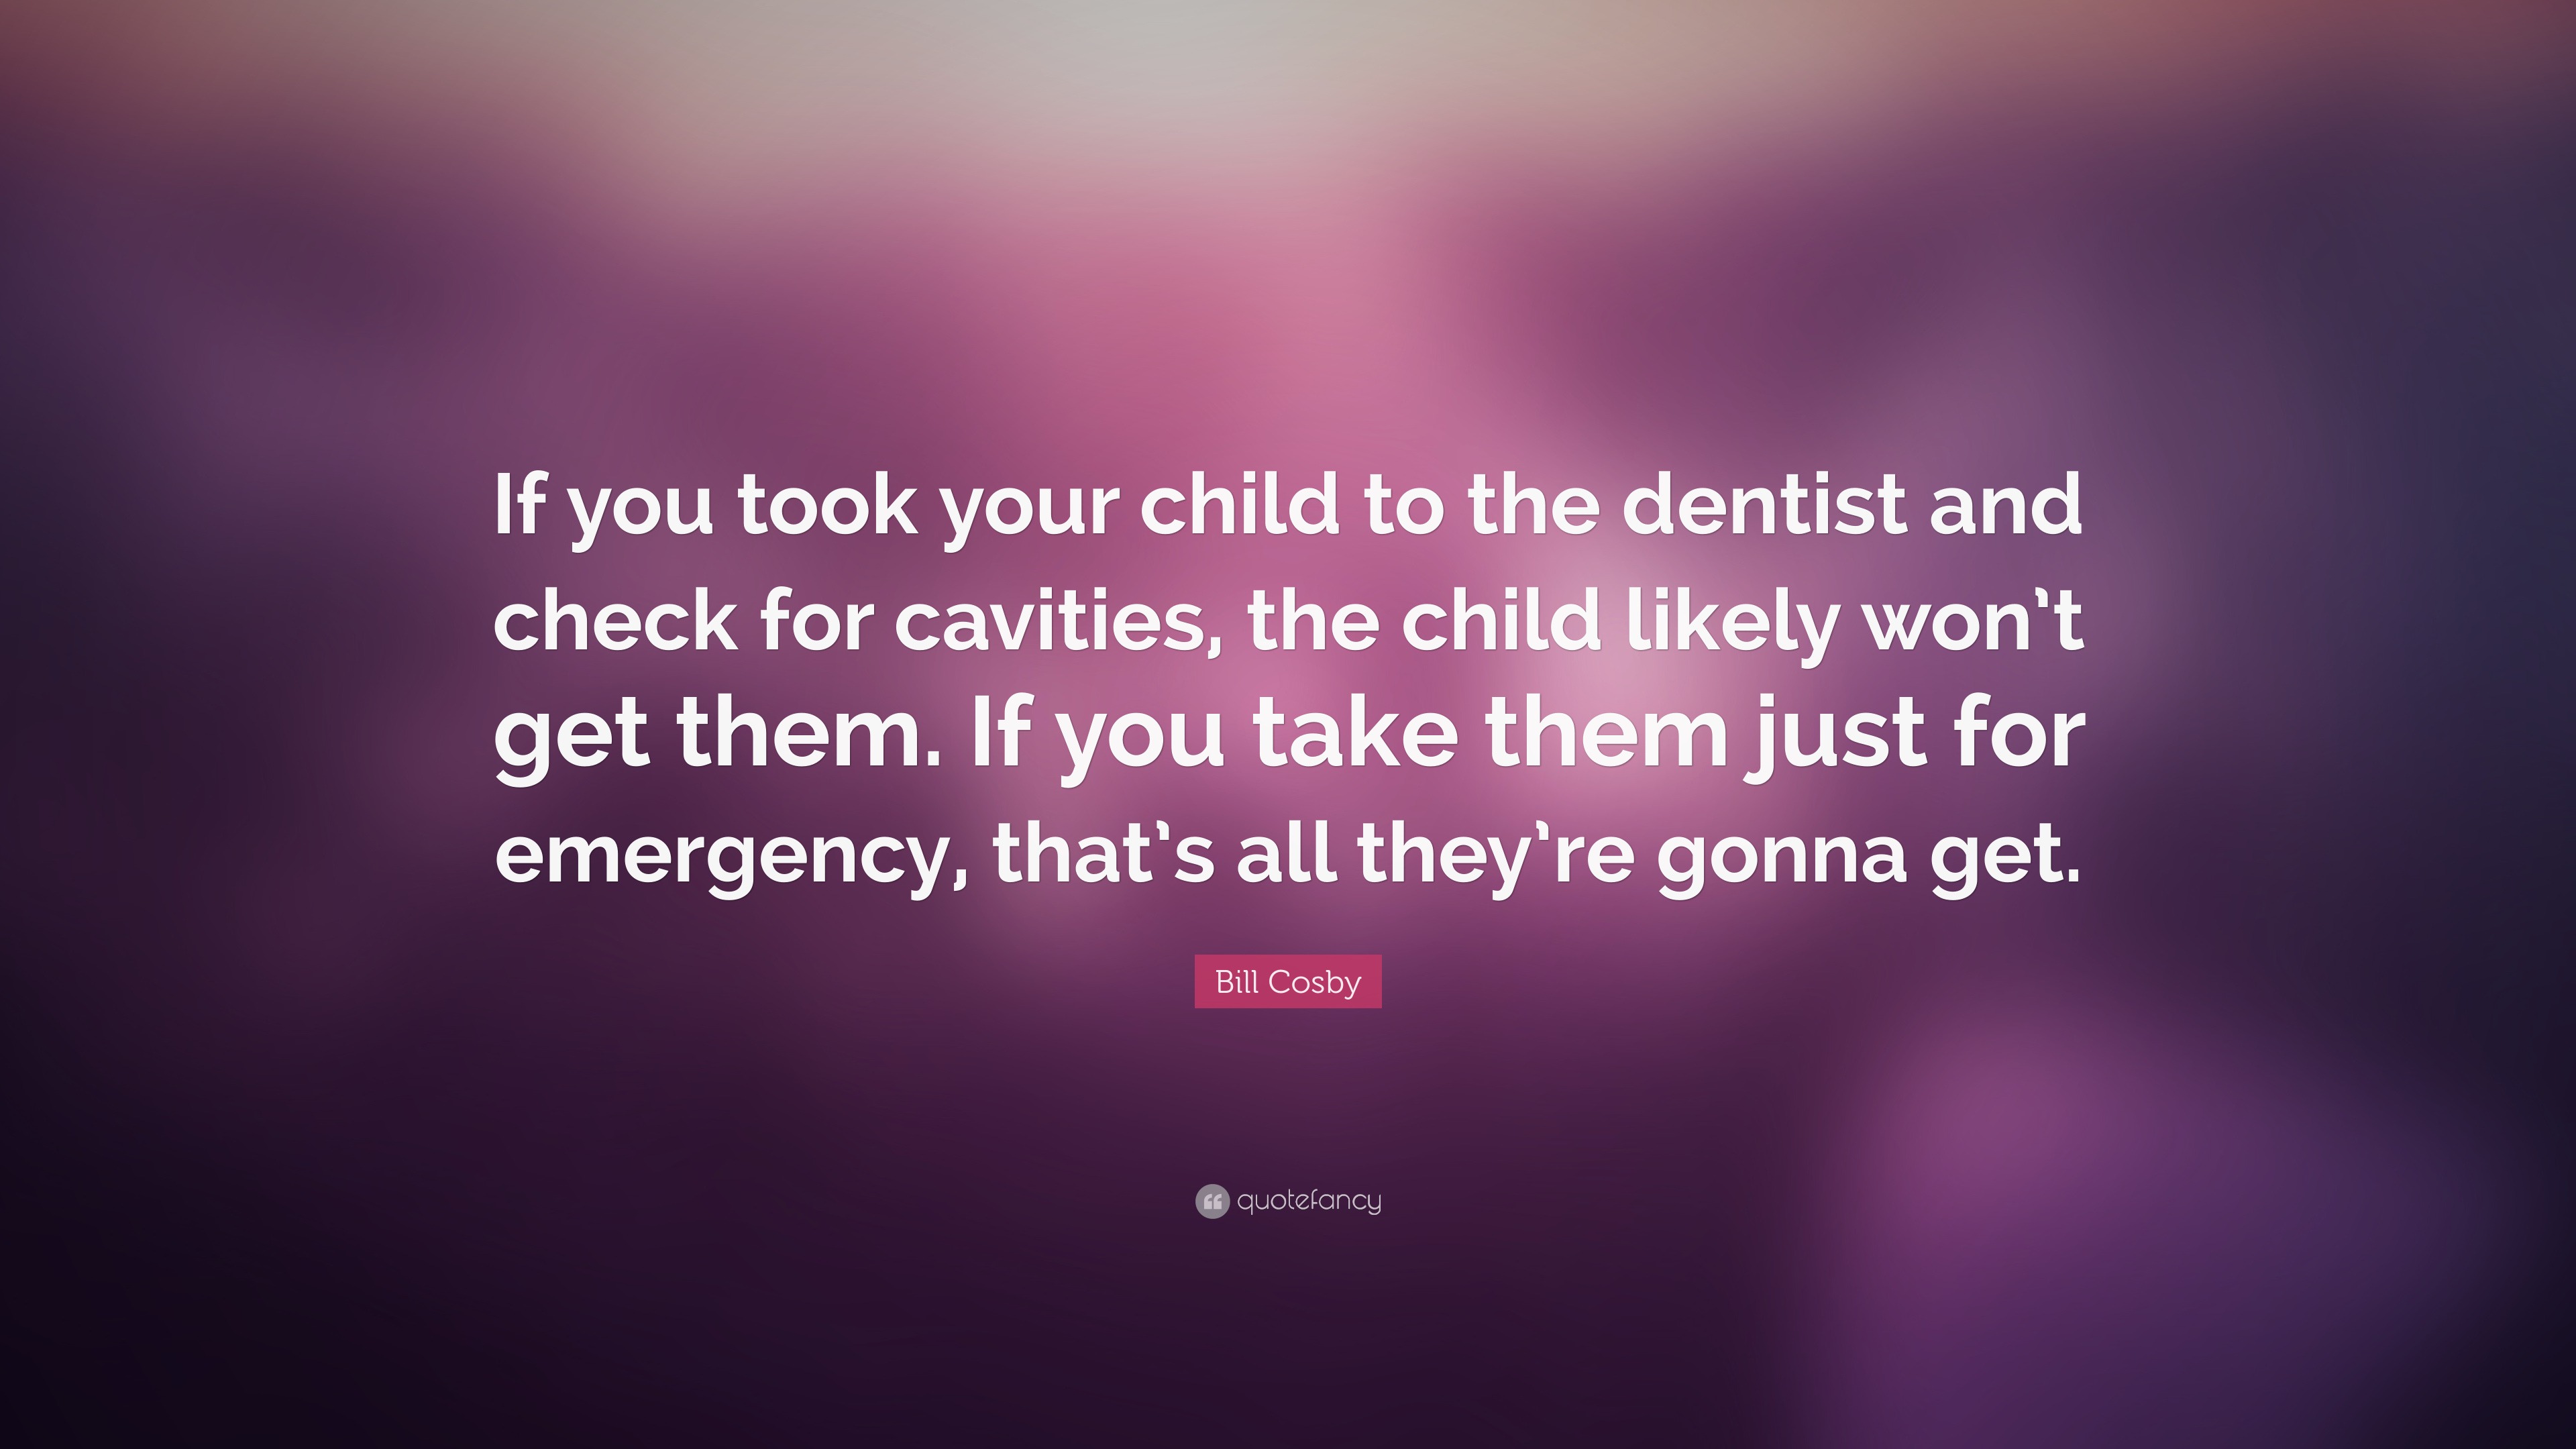 Bill Cosby Quote: “If you took your child to the dentist and check for ...